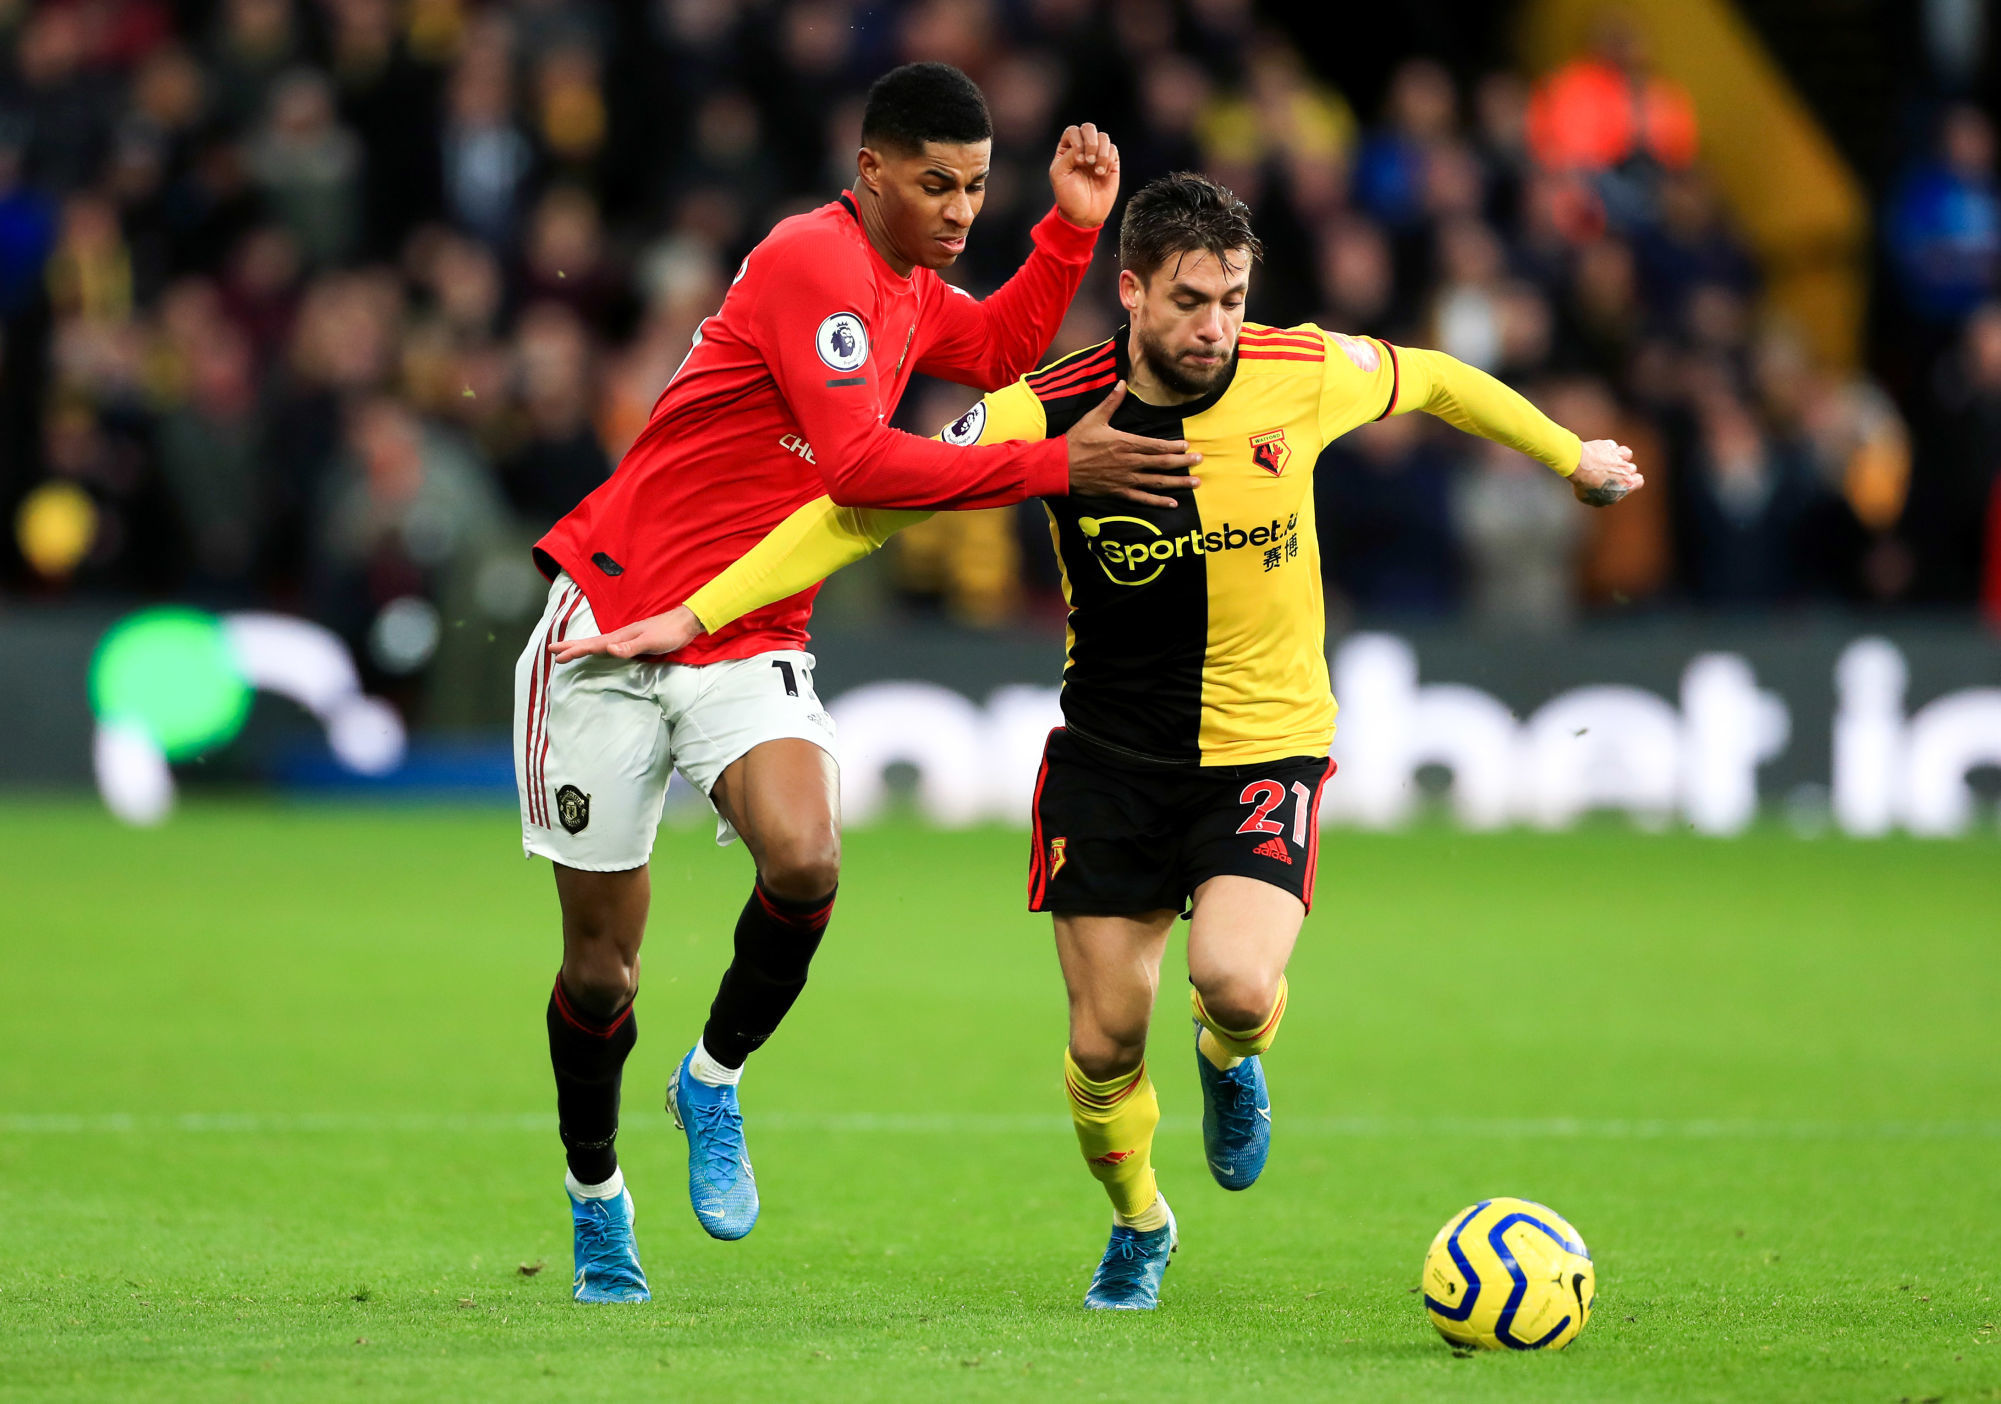 Manchester United's Marcus Rashford (left) and Watford's Kiko Femenia battle for the ball during the Premier League match at Vicarage Road, Watford. 

Photo by Icon Sport - Vicarage Road - Watford (Angleterre)